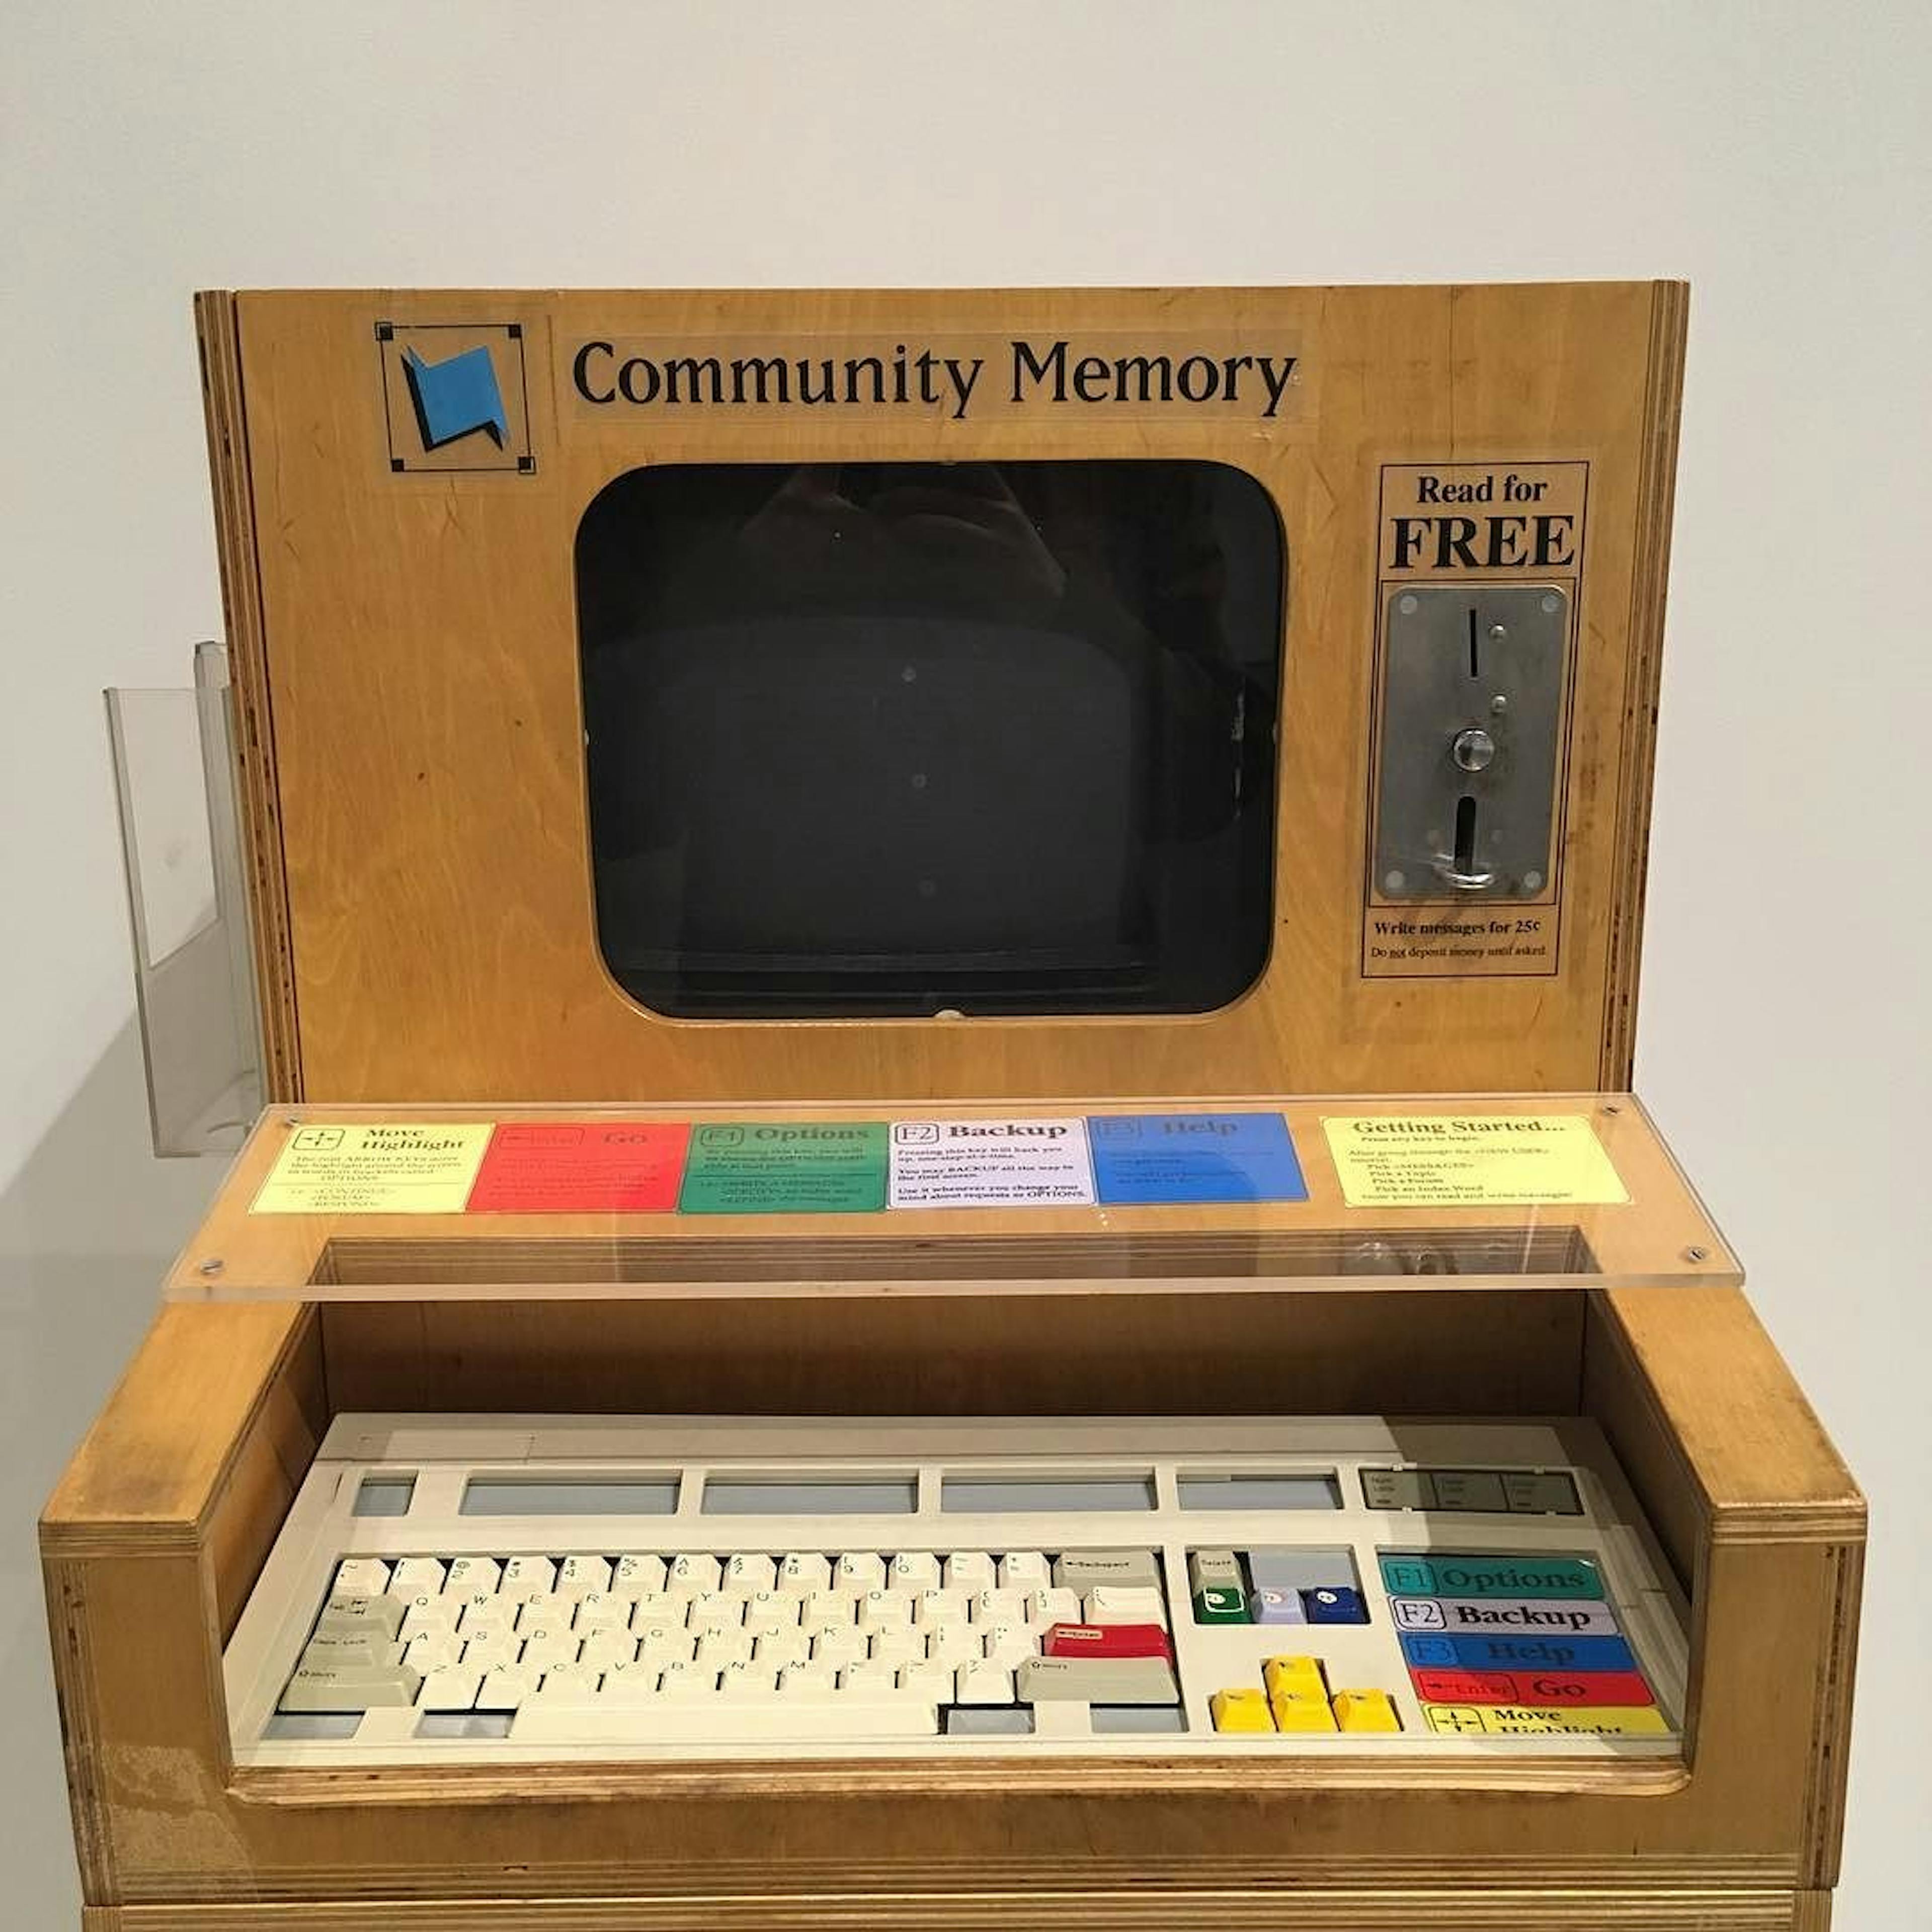 Community Memory Terminal at the Computer History Museum (California). Image by Evan P. Cordes / Wikimedia